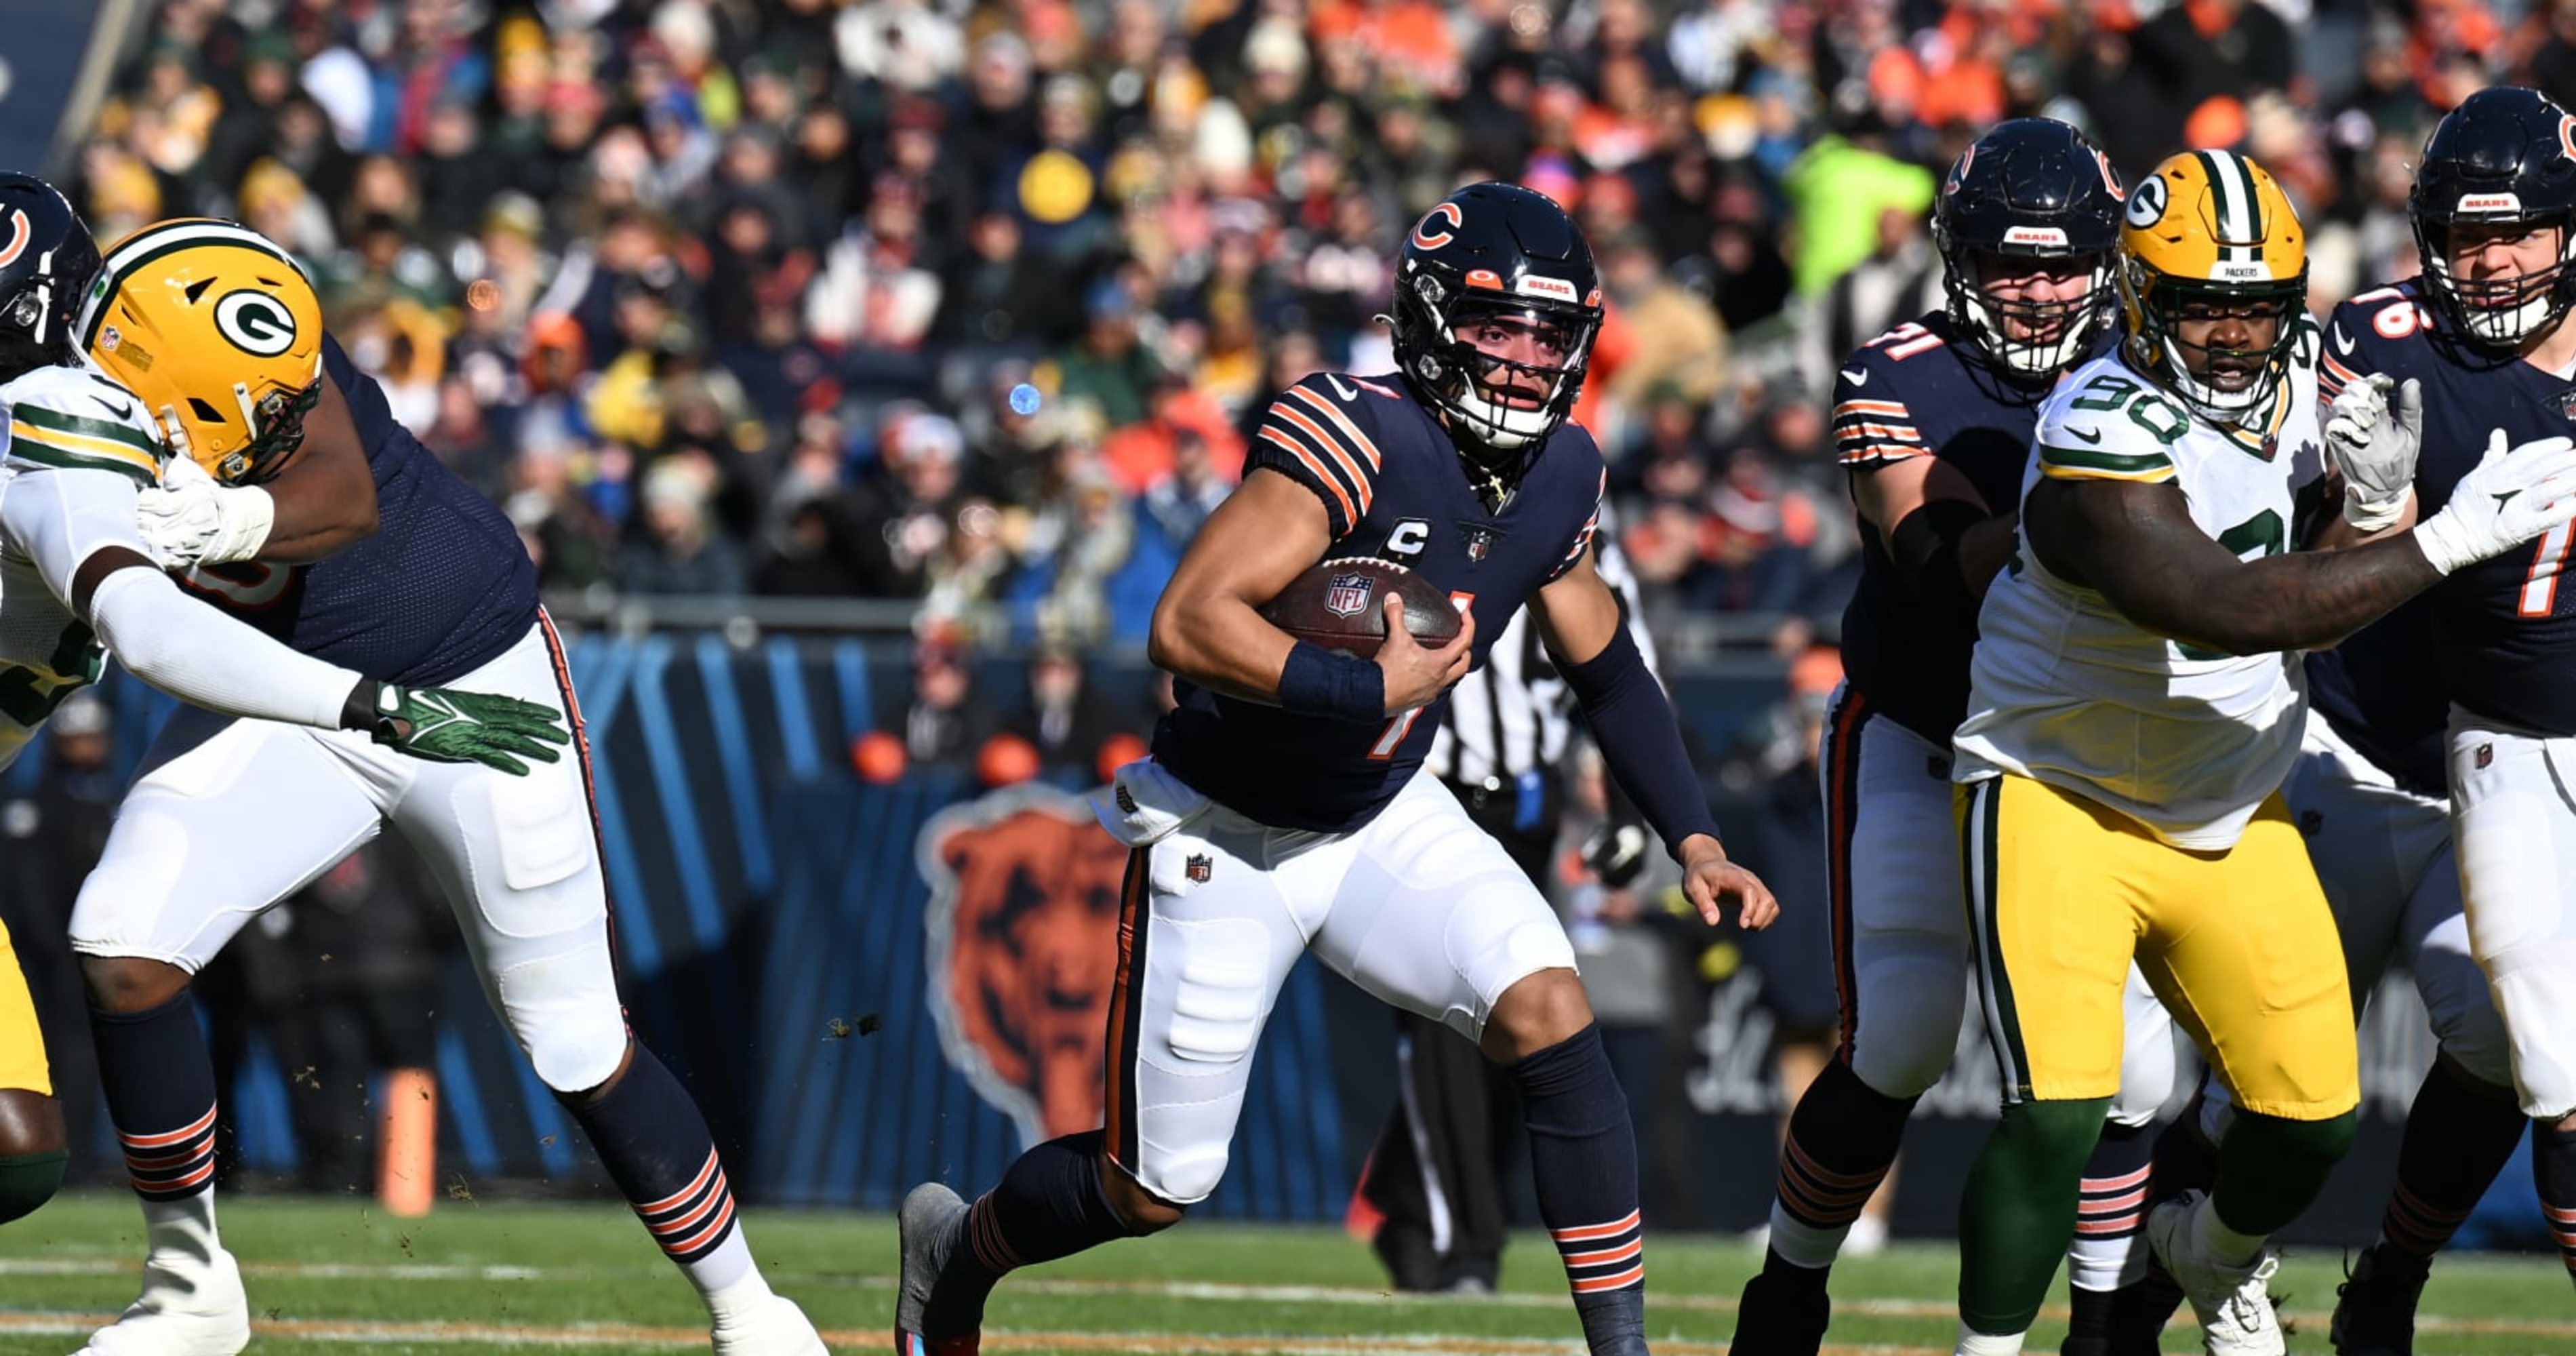 RECAP: Chicago Bears fall 28-19 to Green Bay Packers at Soldier